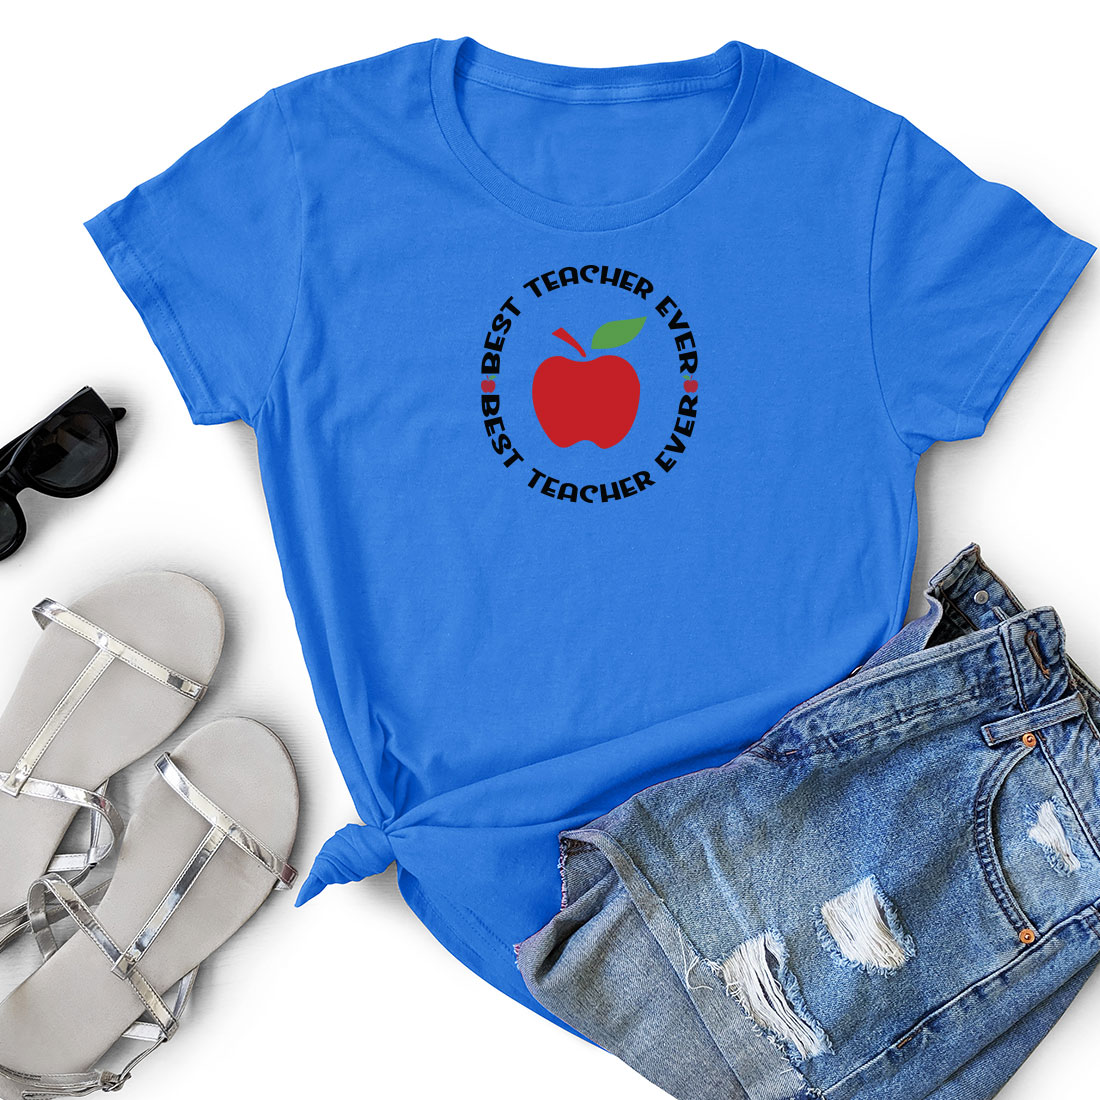 Blue shirt with an apple on it.